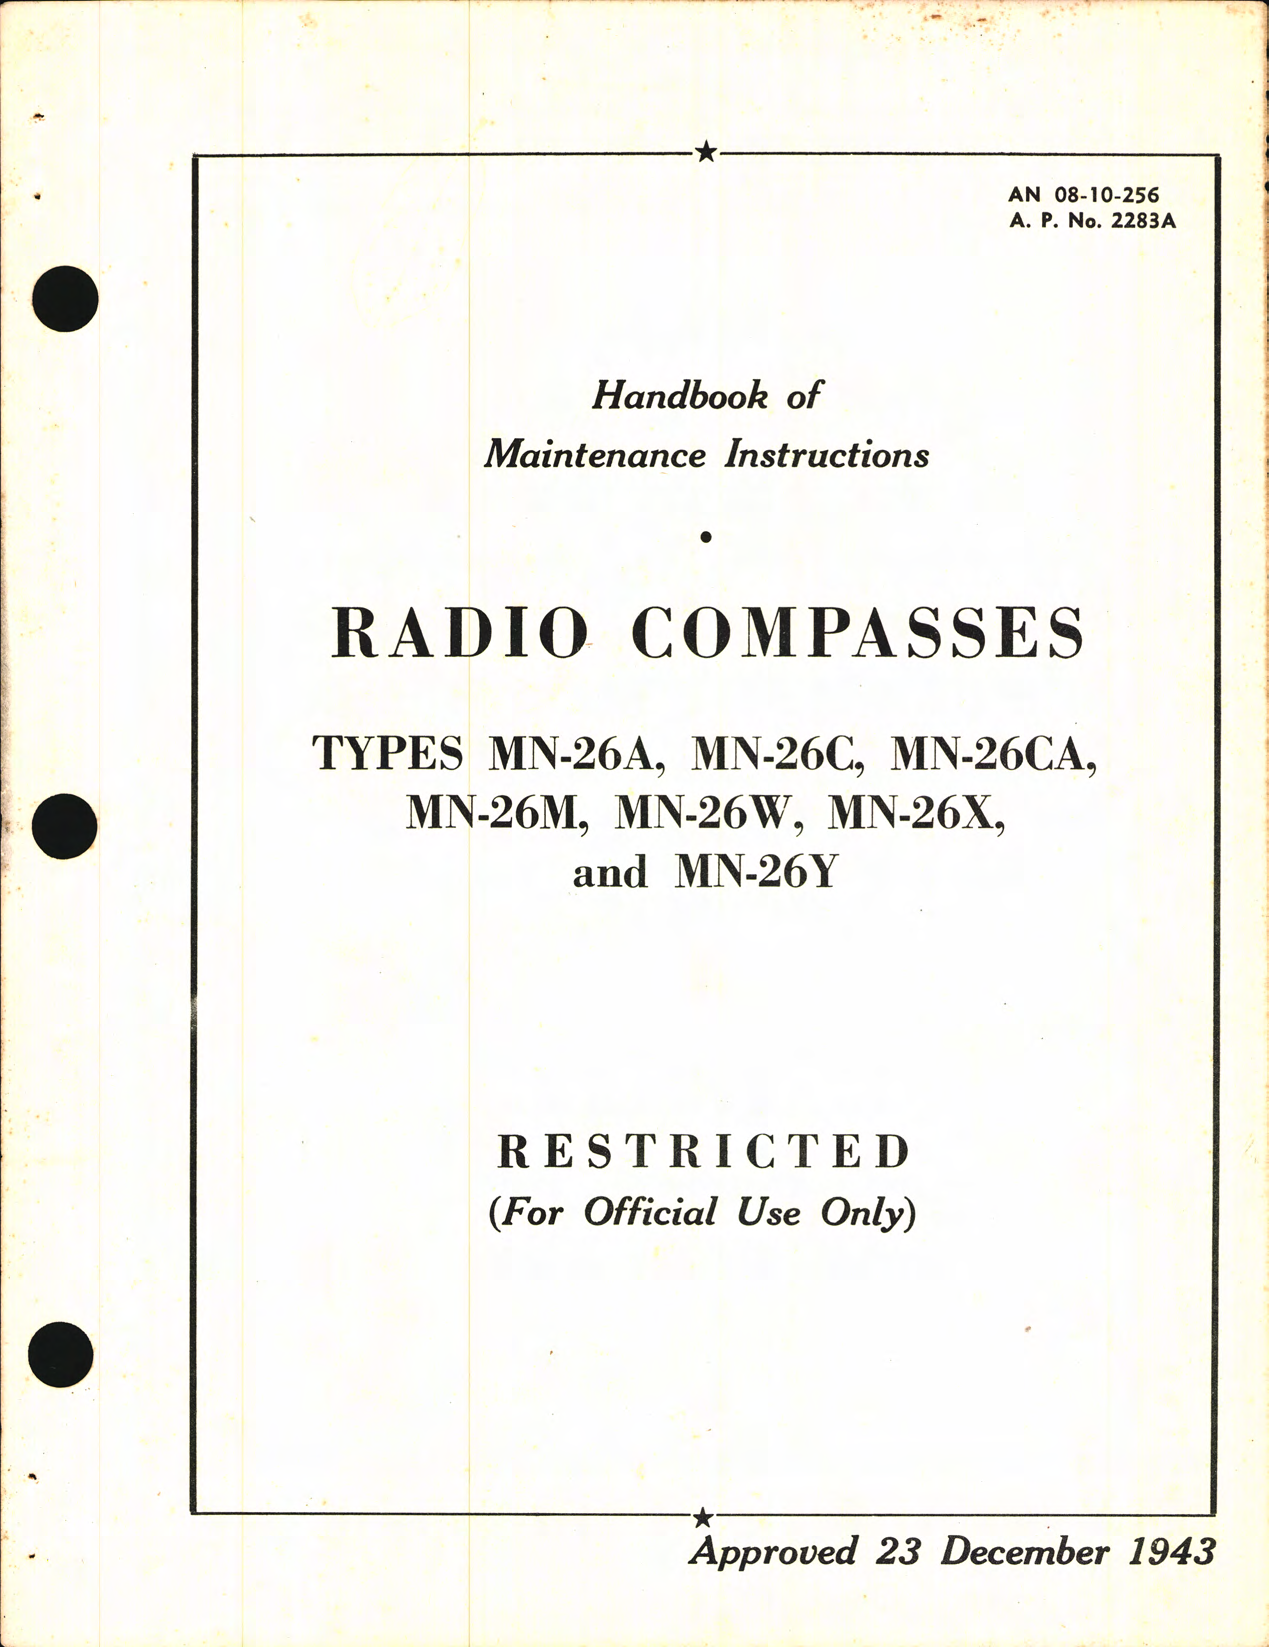 Sample page 1 from AirCorps Library document: Maintenance Instructions for Radio Compasses